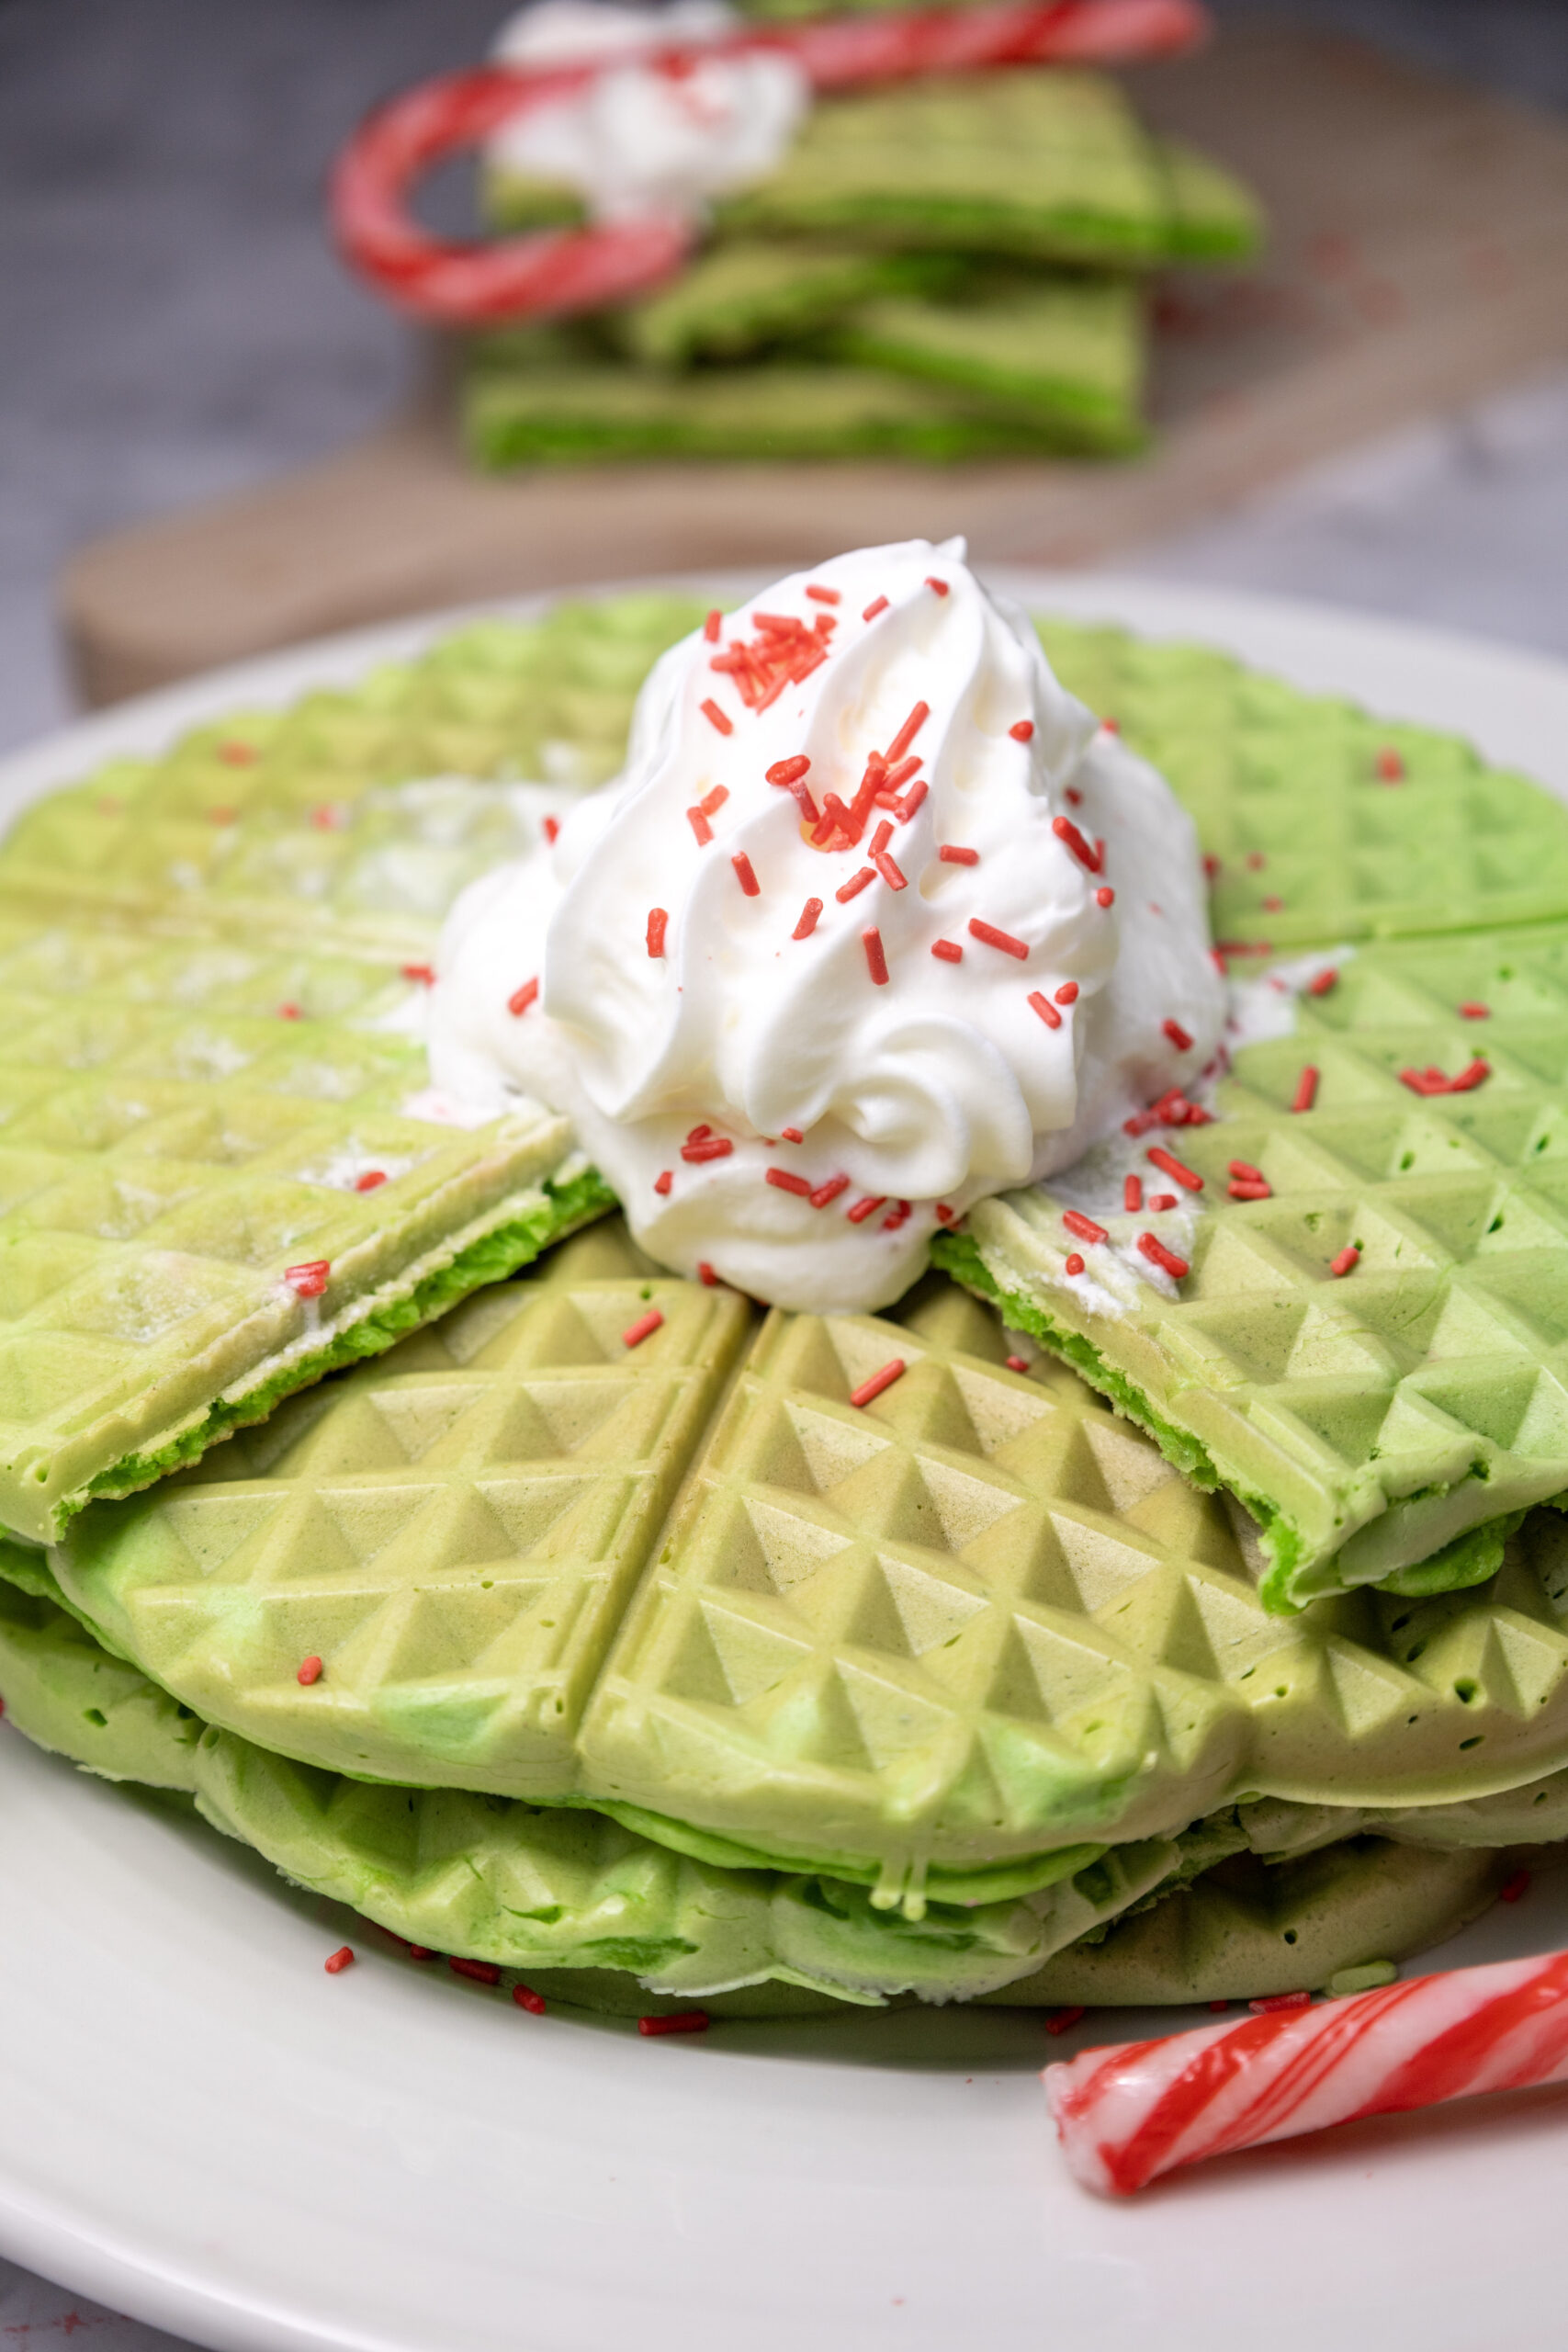 green waffles on plate with sprinkles and whipped cream